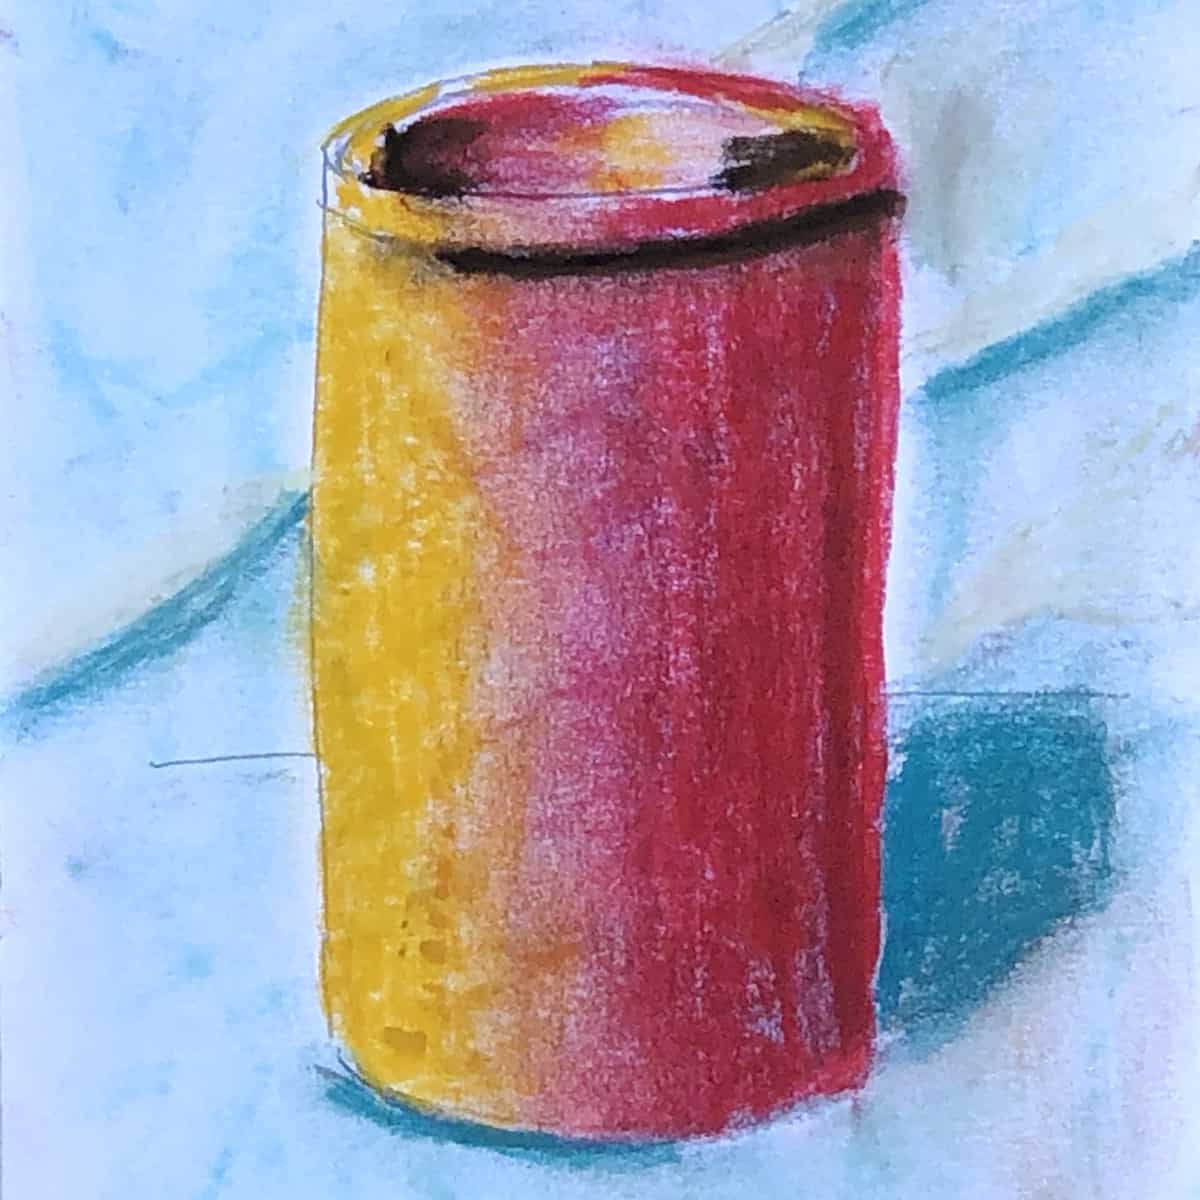 Cylinder drawn with soft pastels